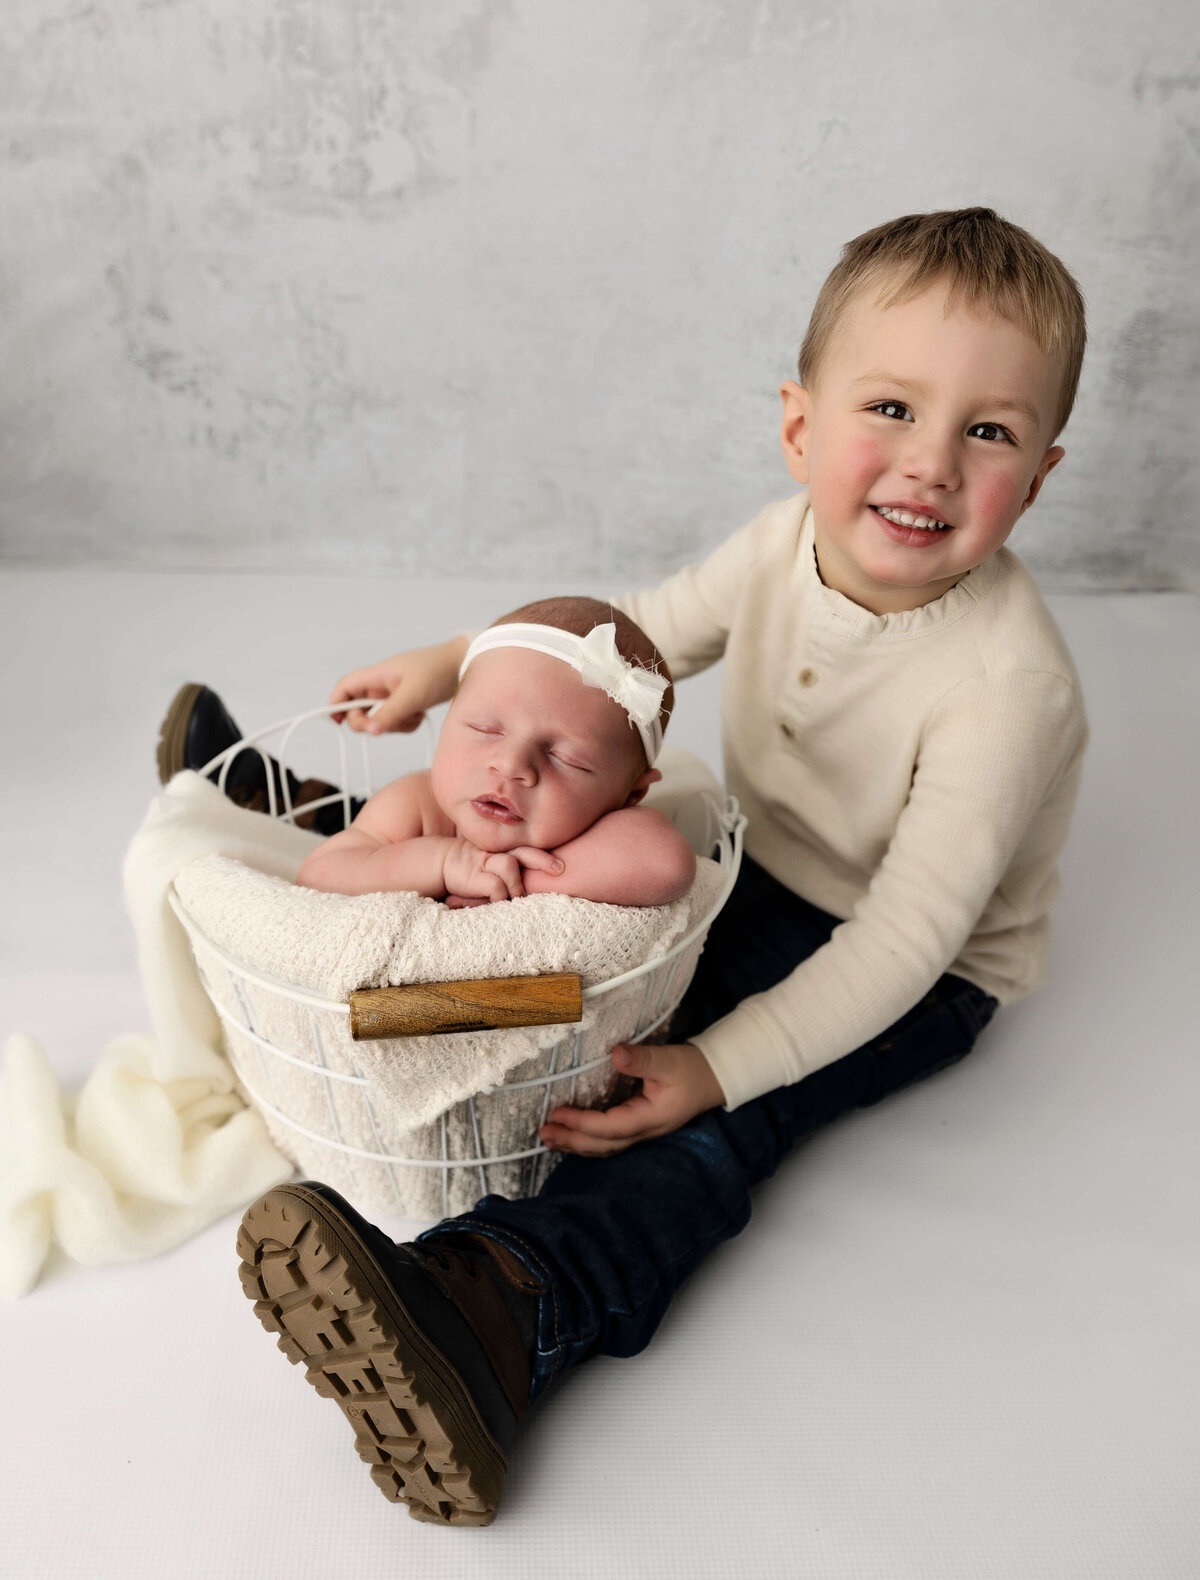 Big brother and newborn baby sister posed in an Erie Pa photography studio